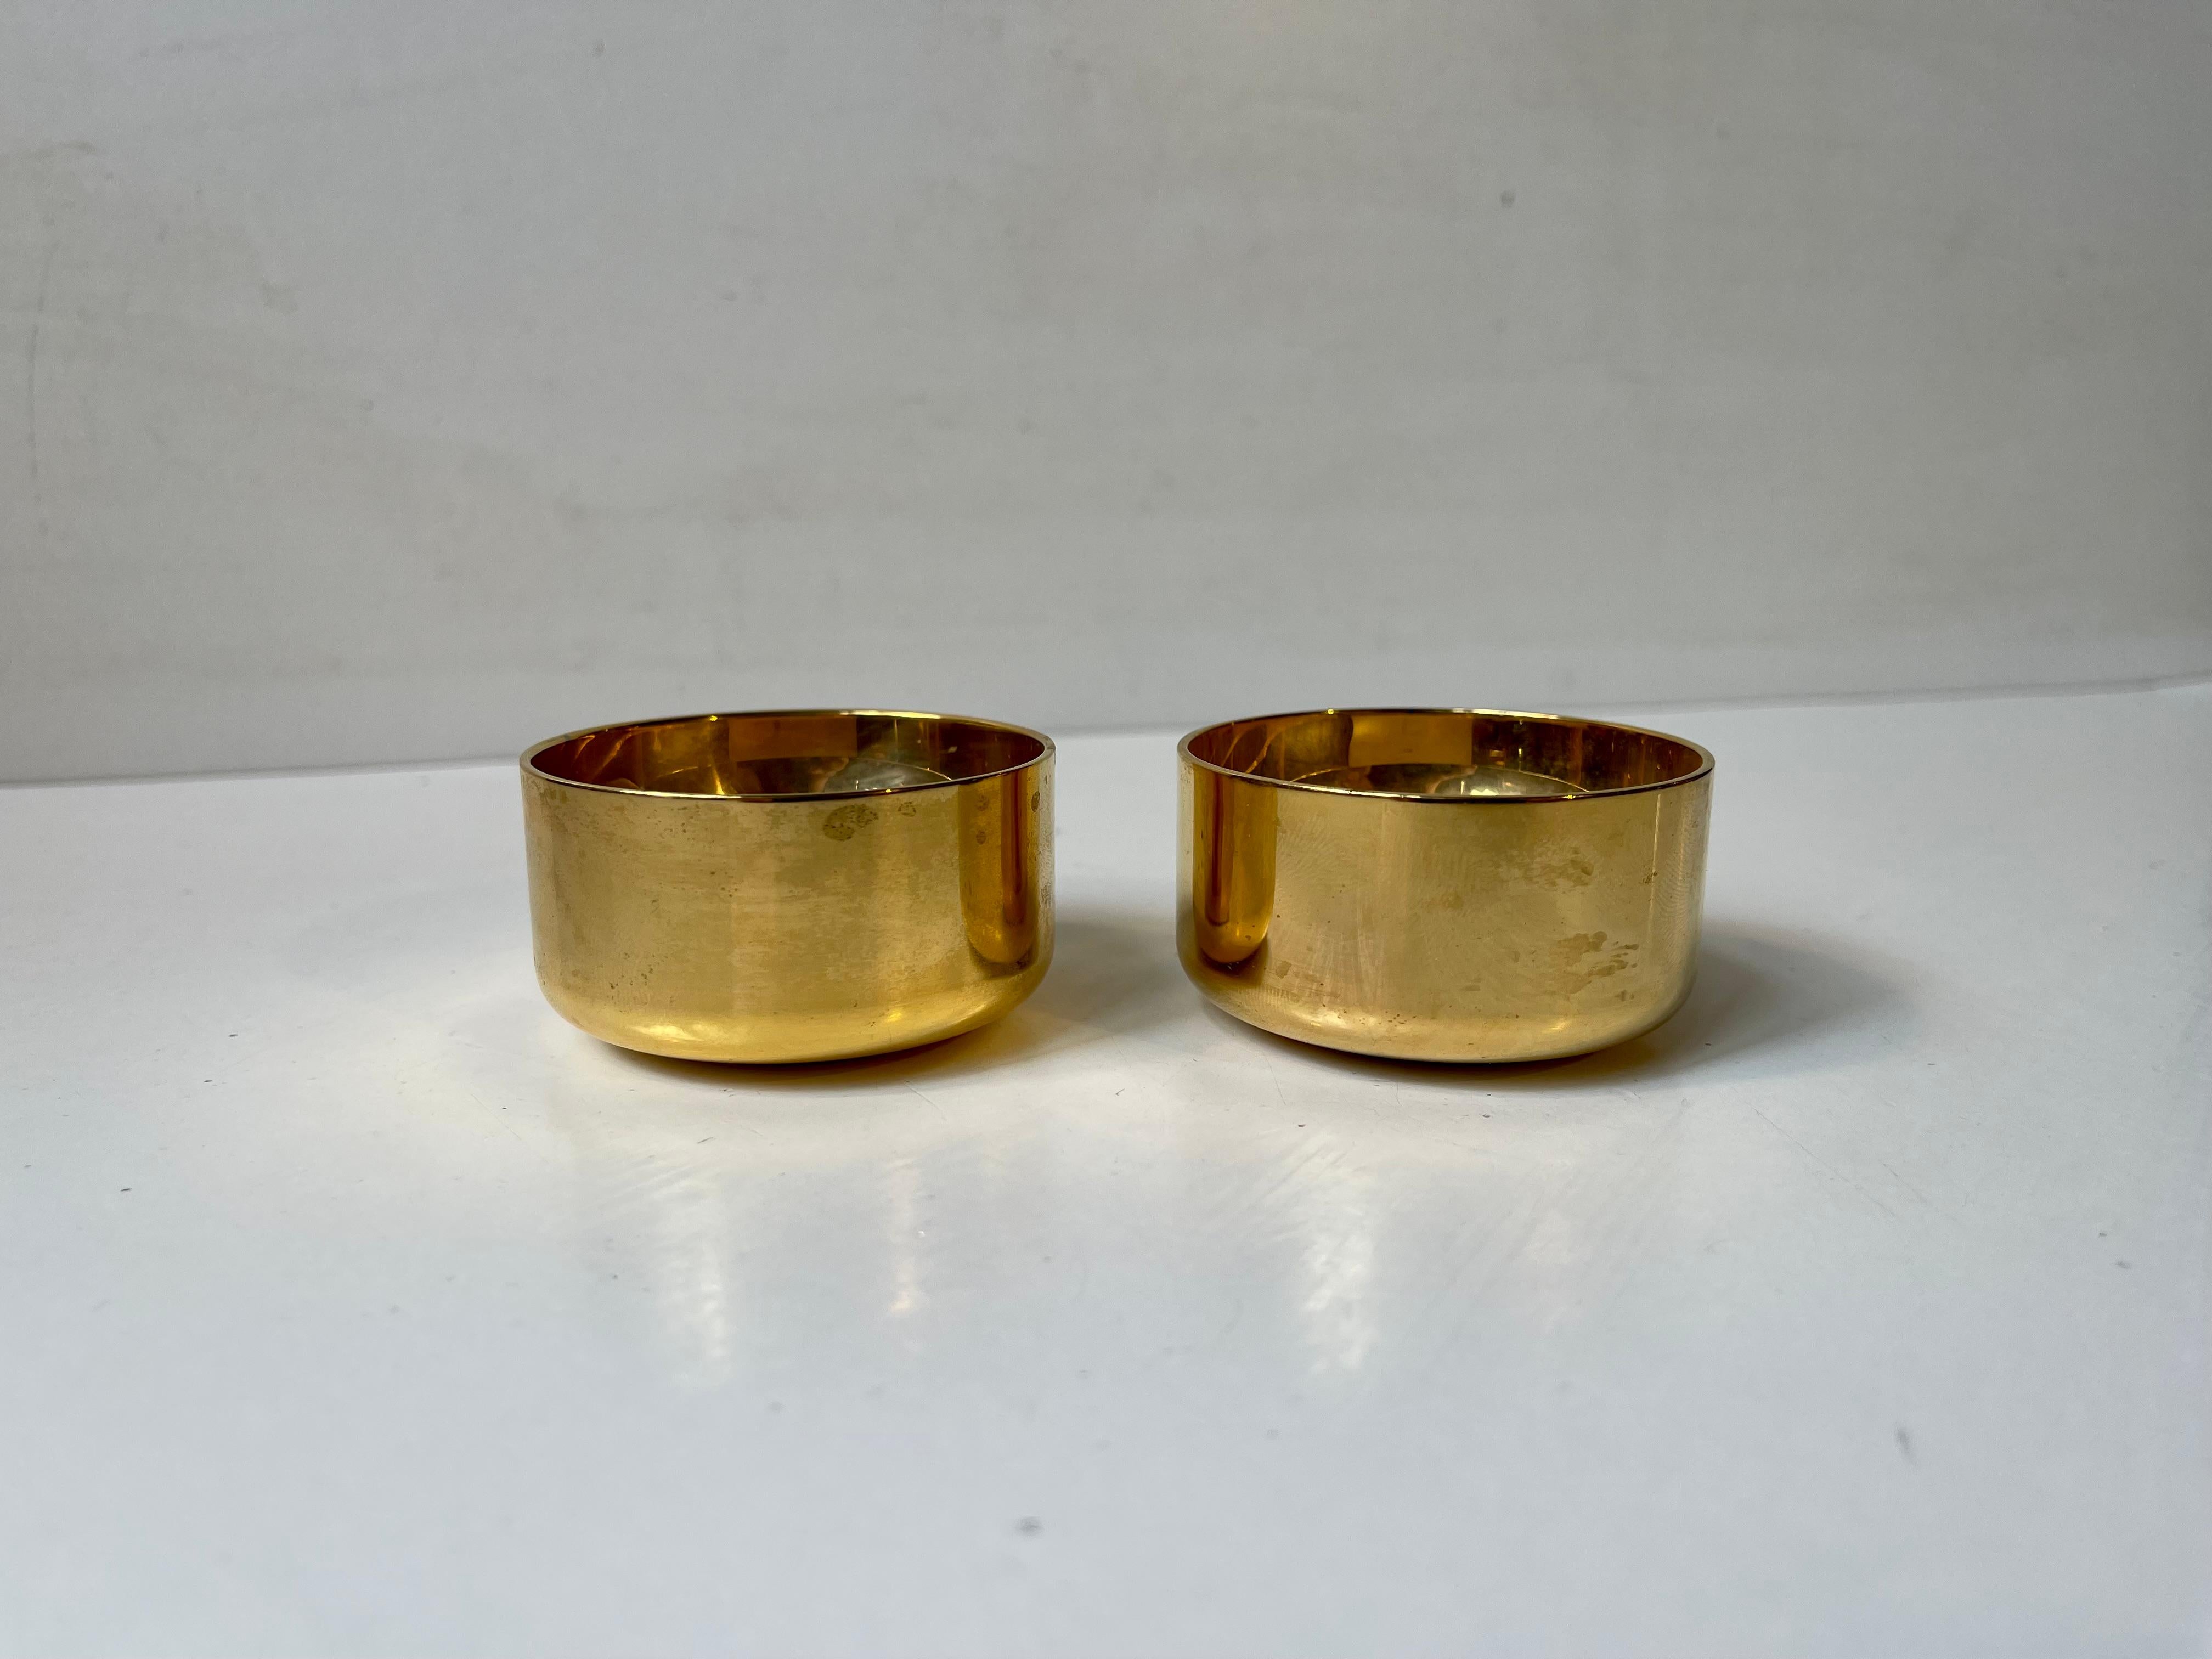 Scandinavian Modern Gold Plated Tealight Candleholders by Pierre Forssell for Skultuna, Sweden 1960s For Sale